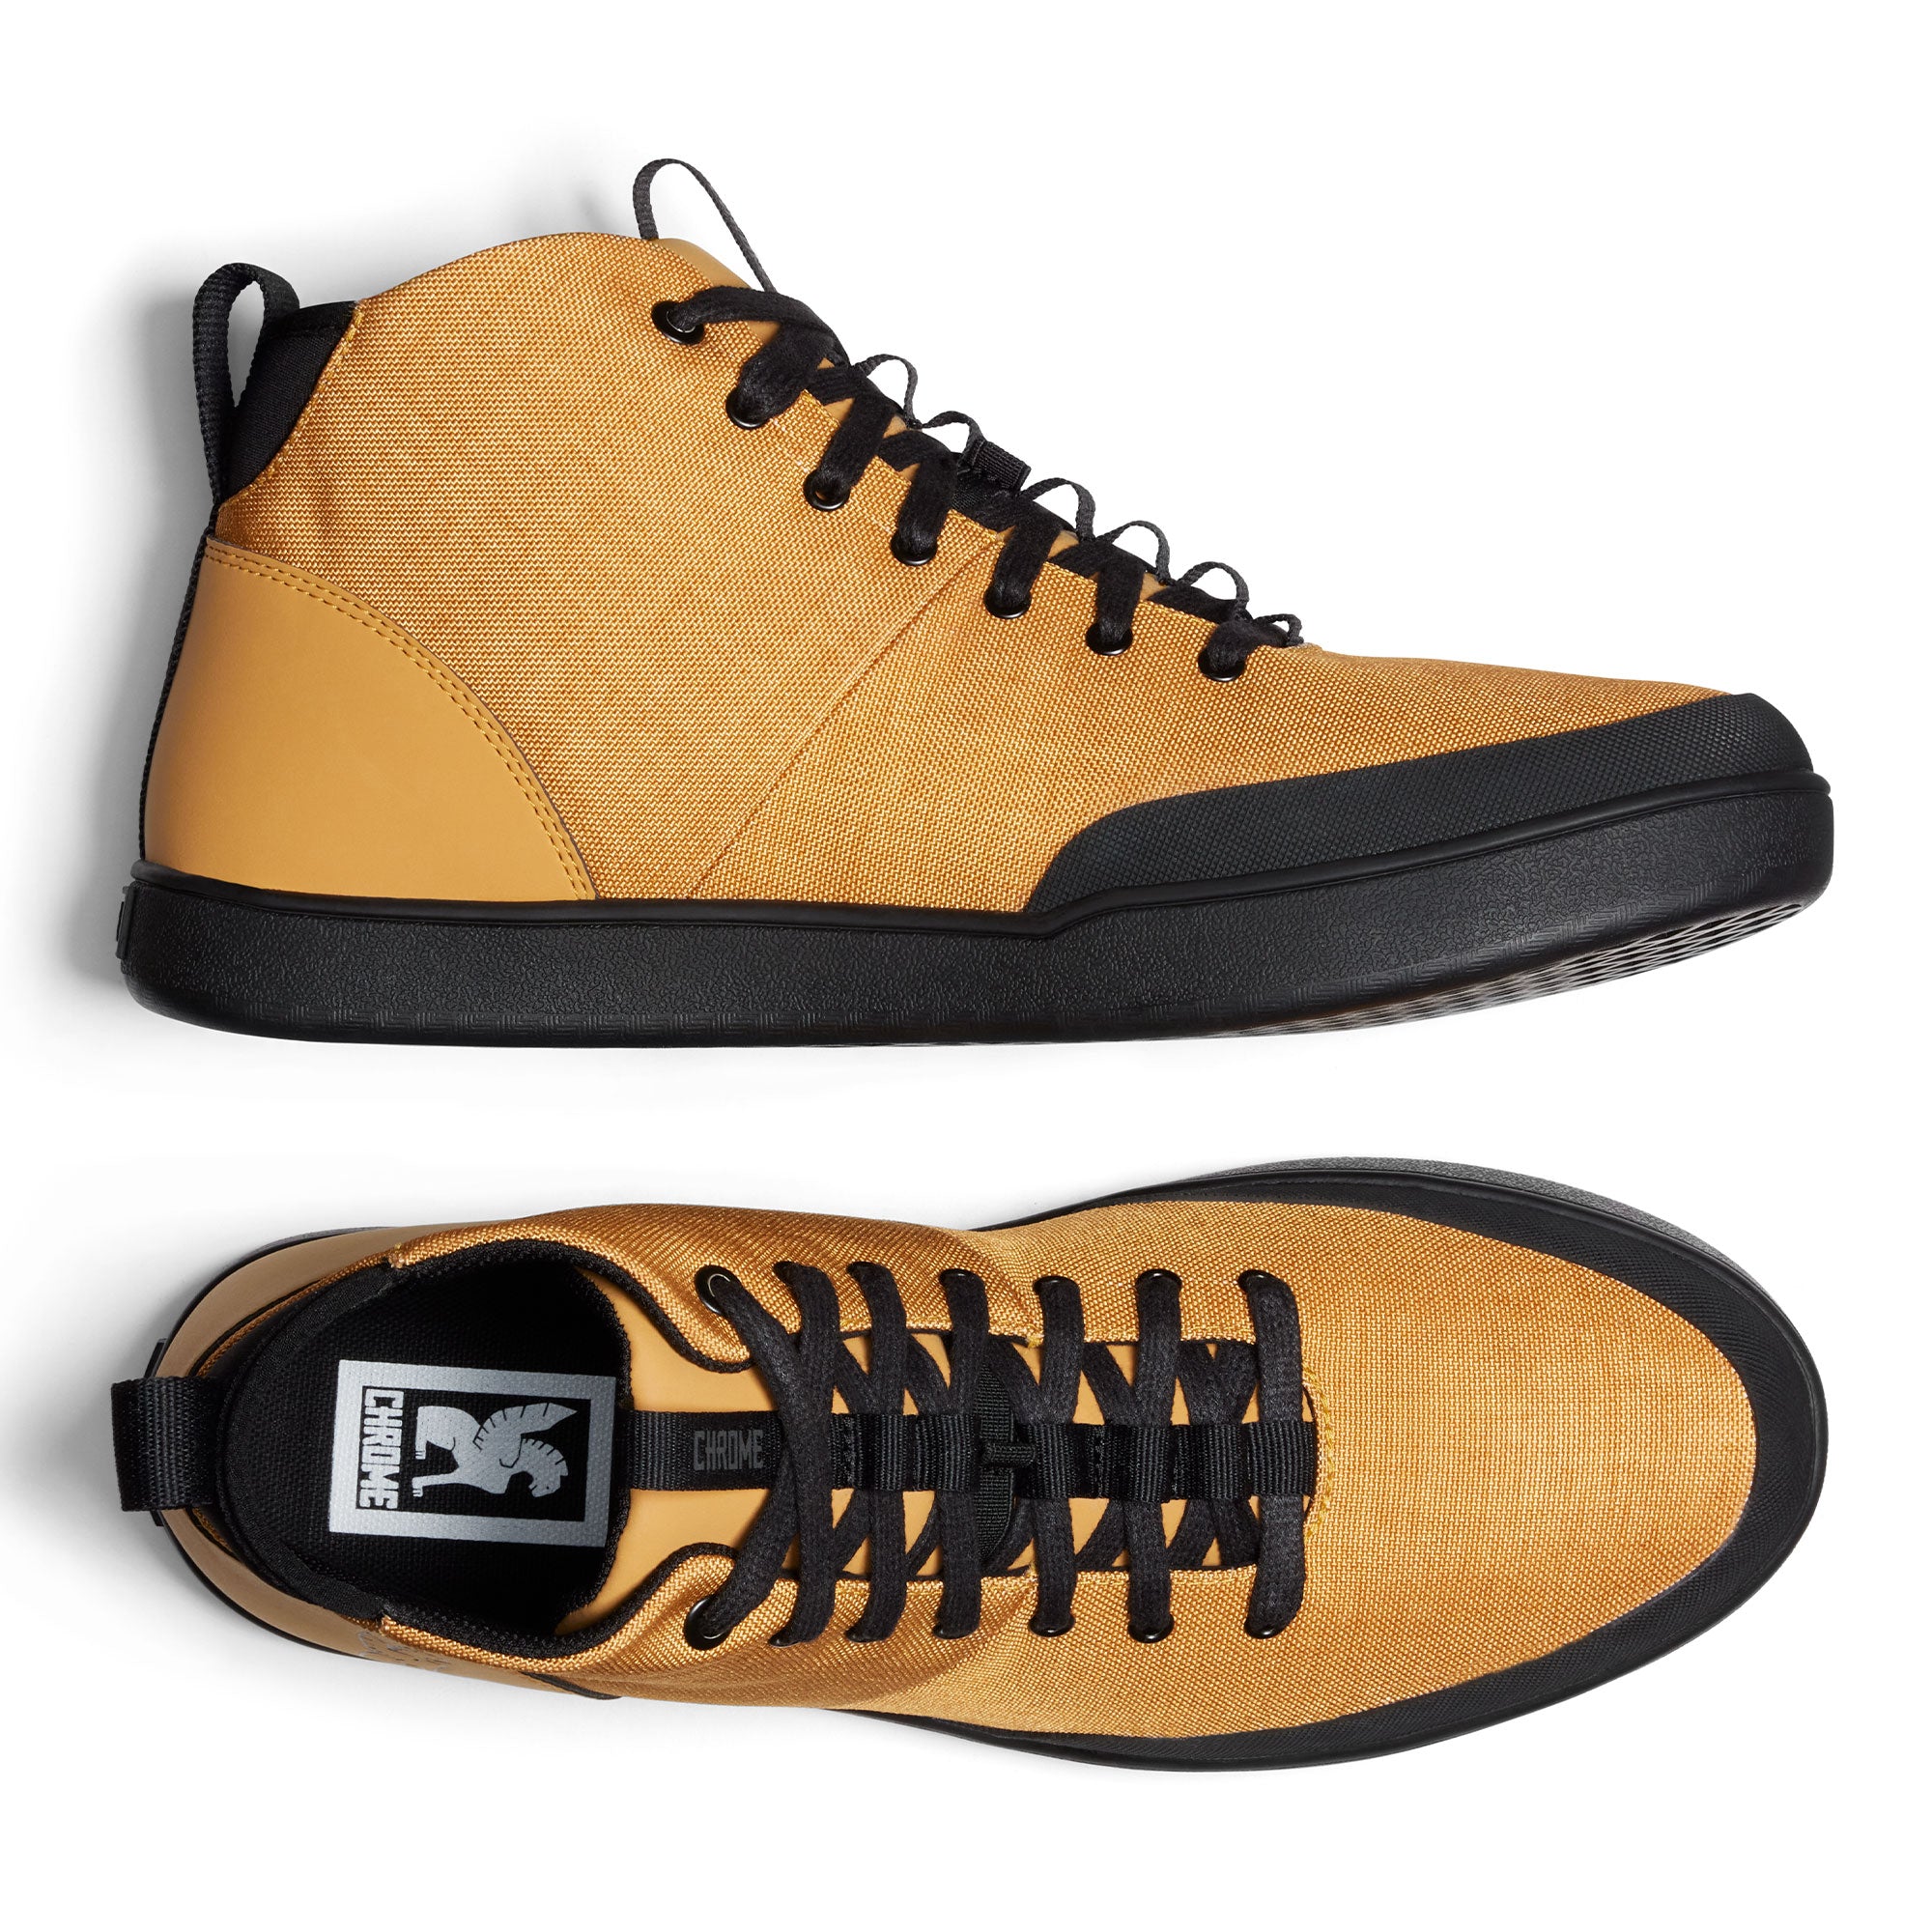 Bromley mid sneaker in wheat side of the shoes #color_wheat black